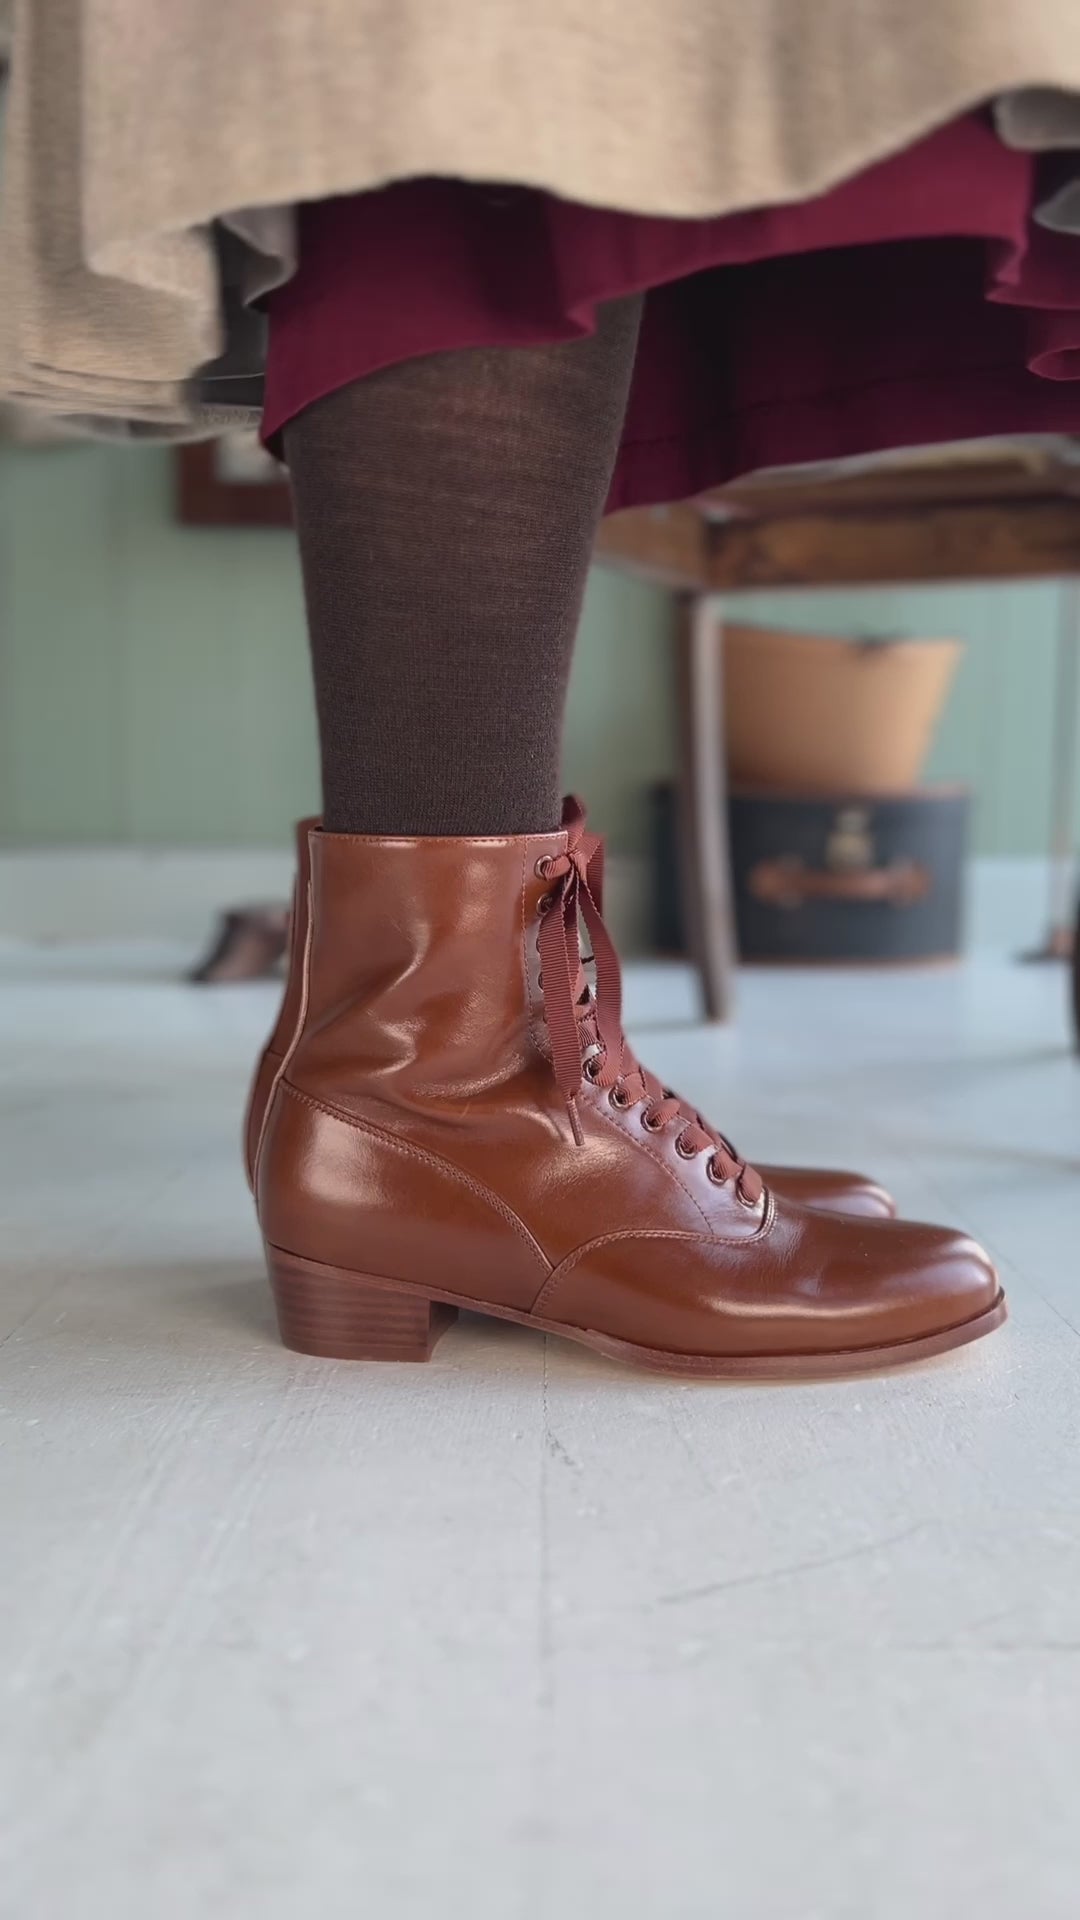 20s / 30s style everyday leather boot  - Brown - Britta